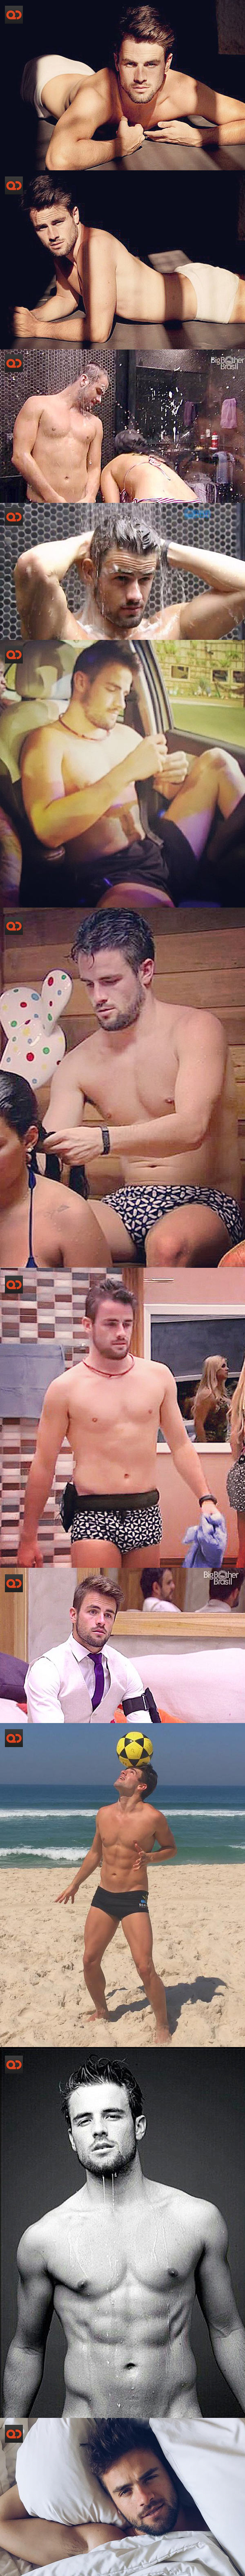 Rafael Licks, From Big Brother Brazil, Exposes His Latin Cock On National TV!